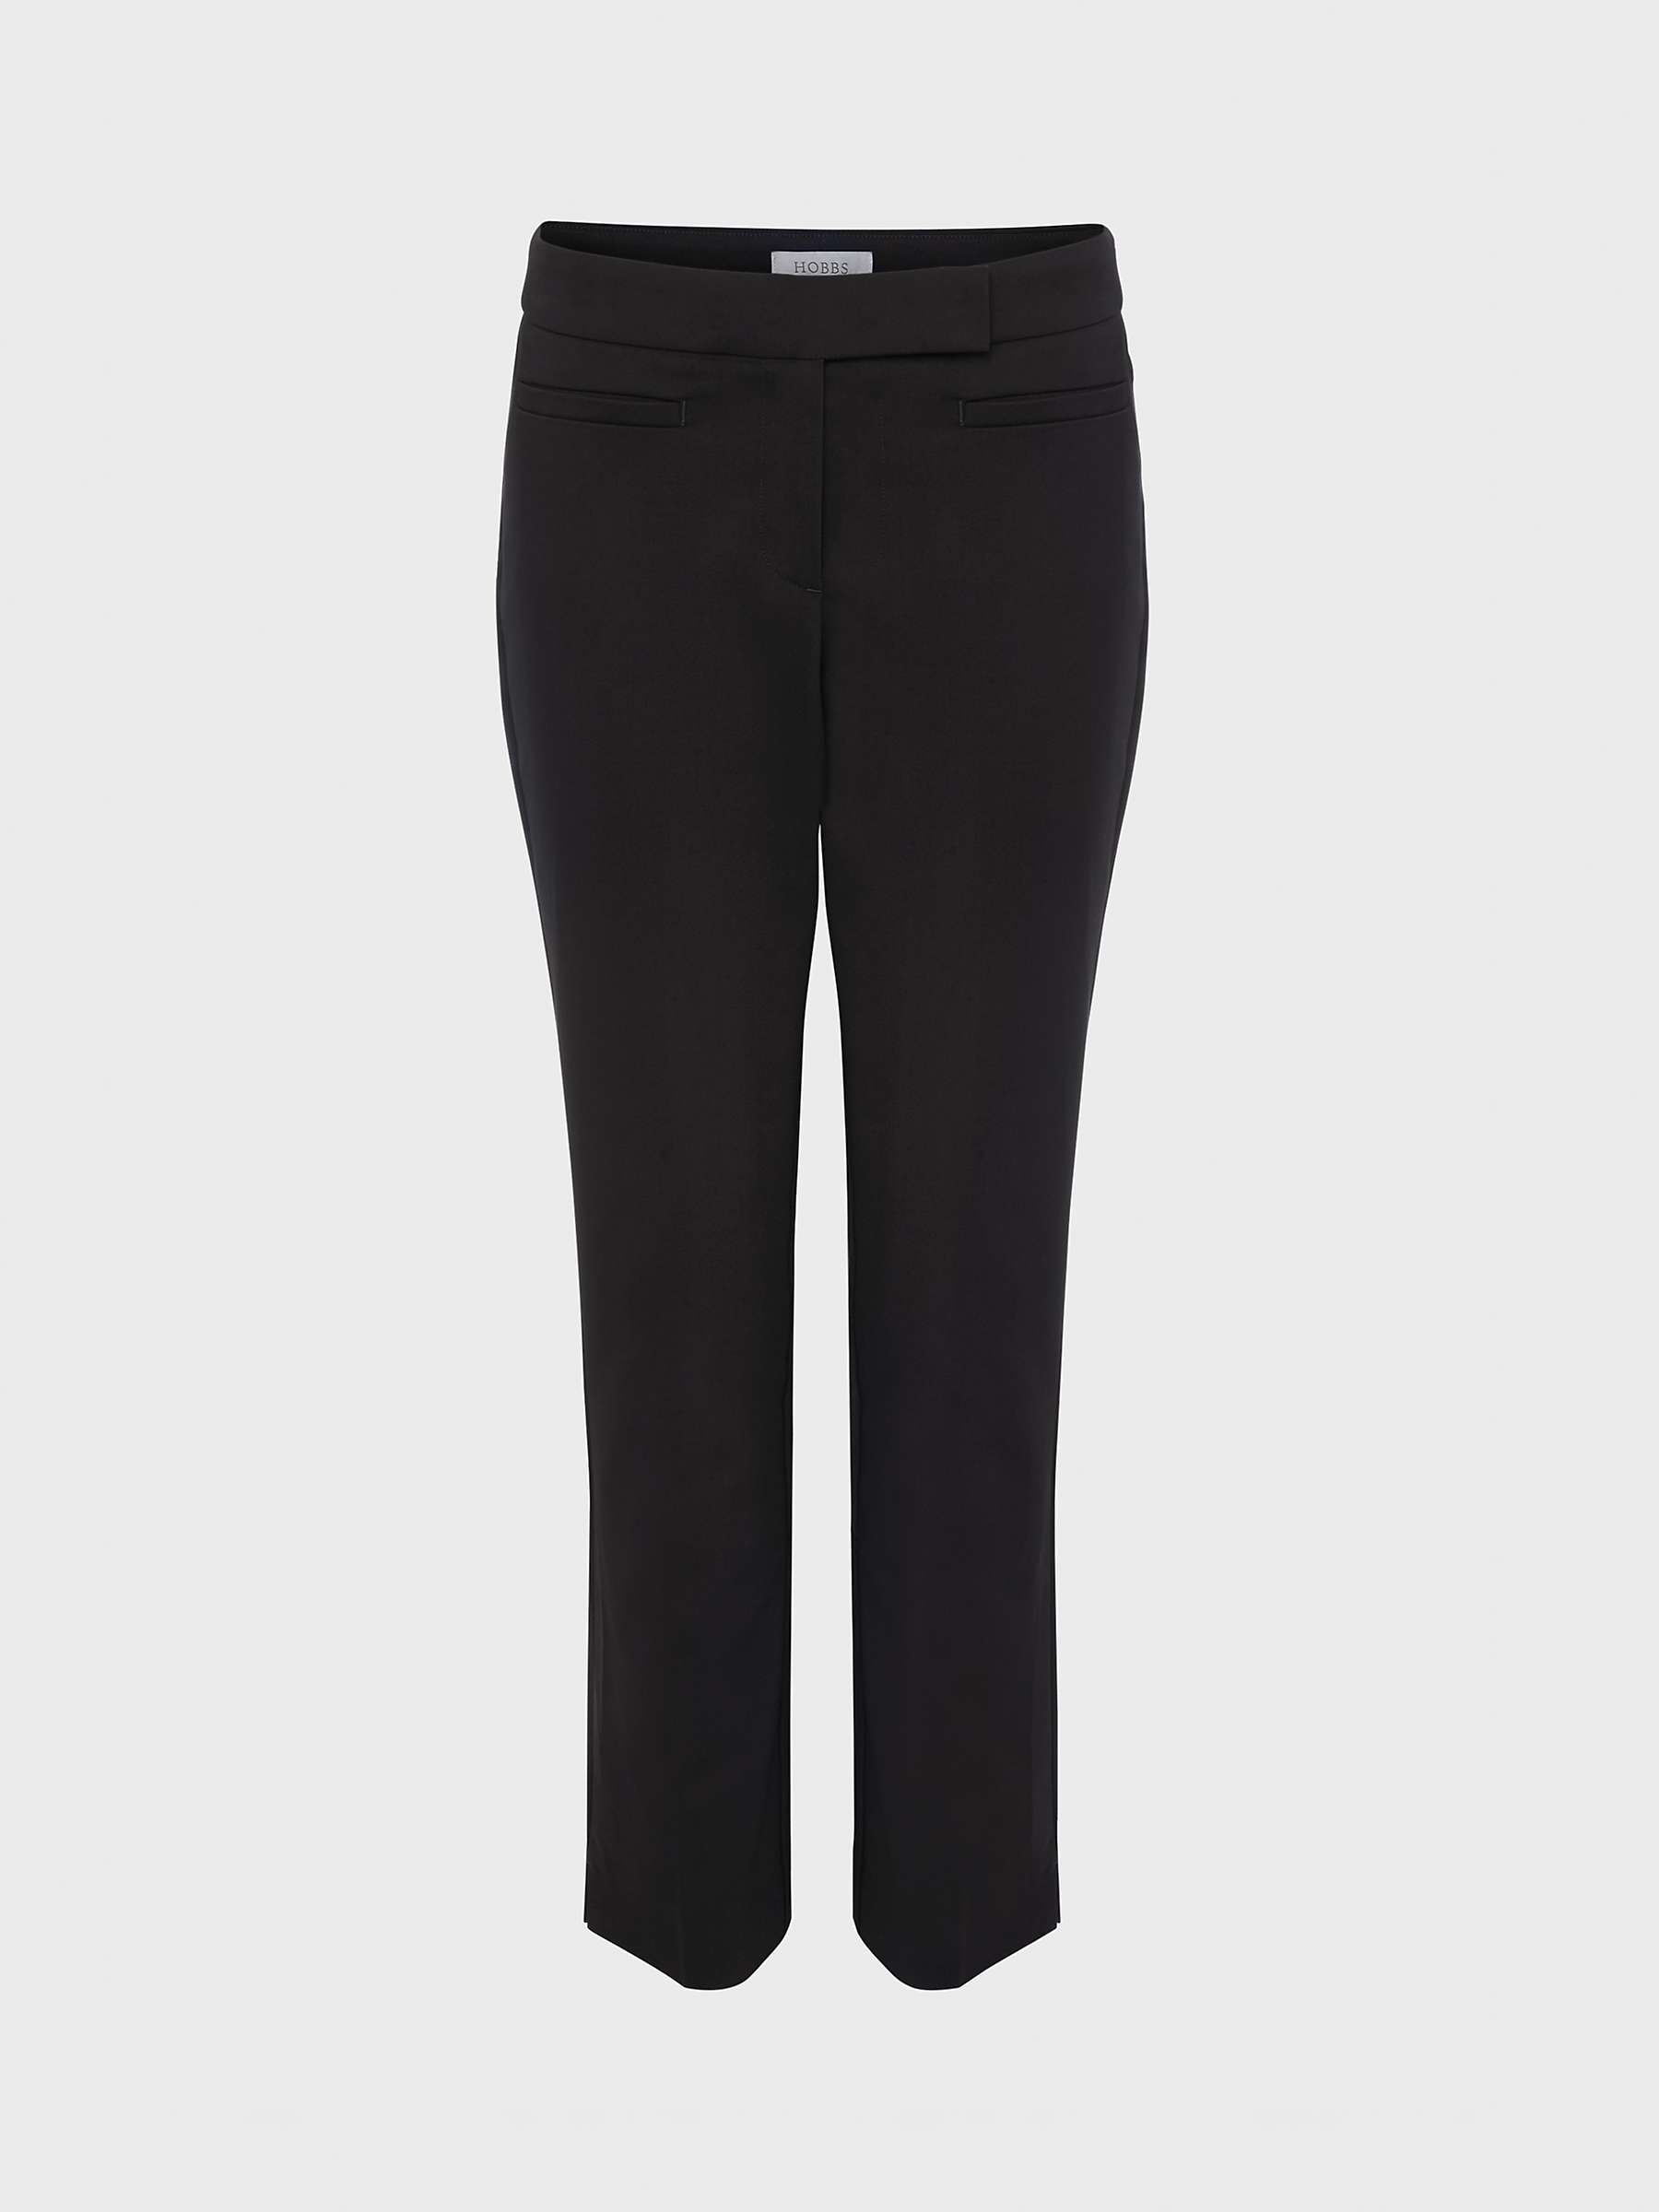 Buy Hobbs Annie Cotton Blend Trousers Online at johnlewis.com